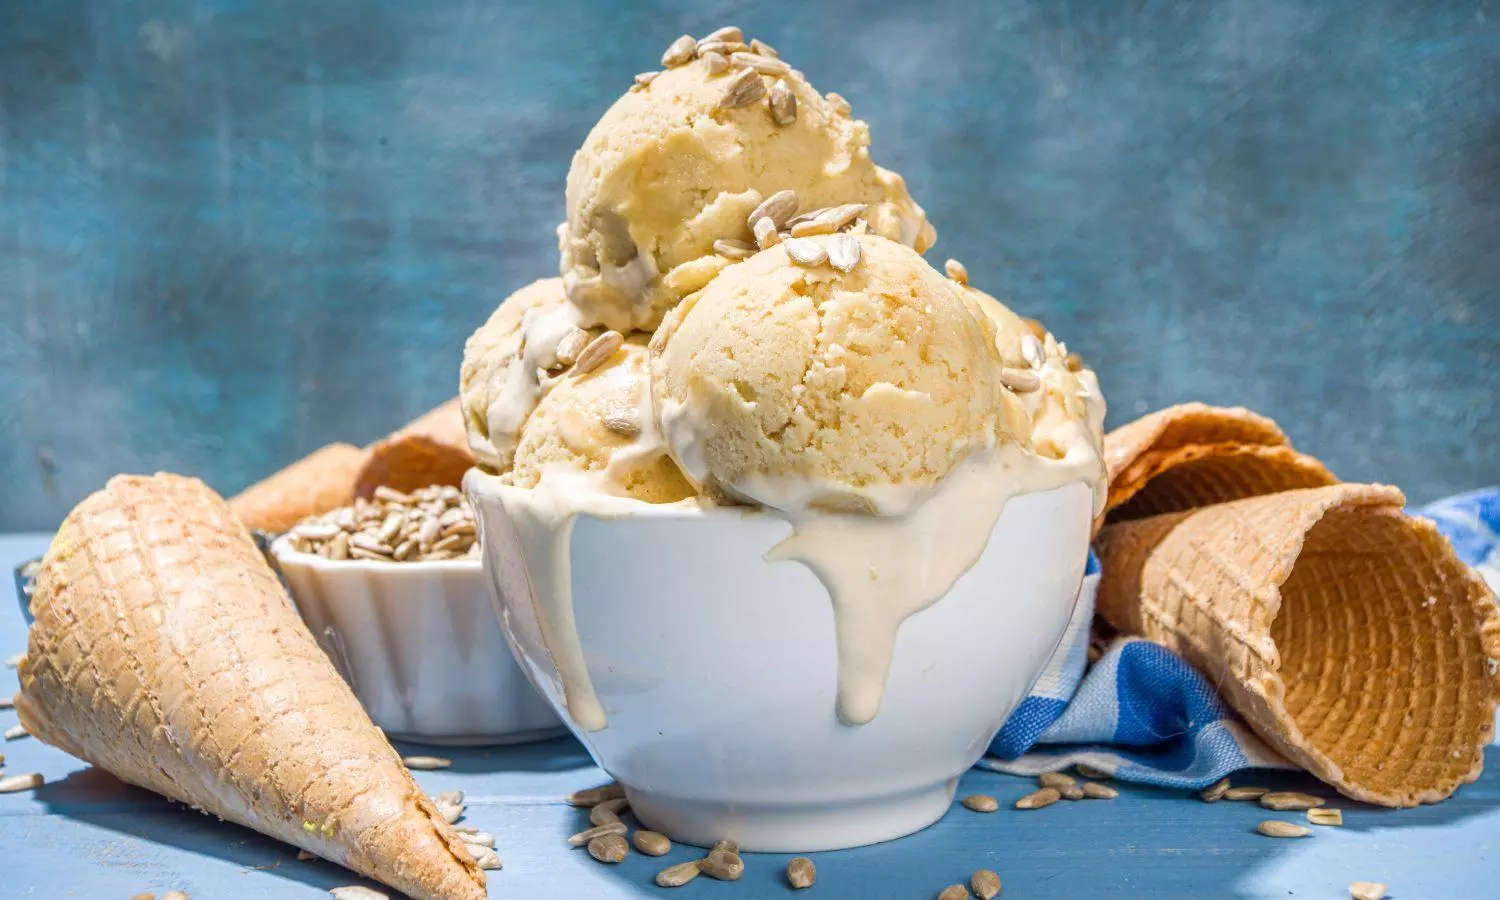 Take a look at our top 5 ice cream brands to beat the heat this summer